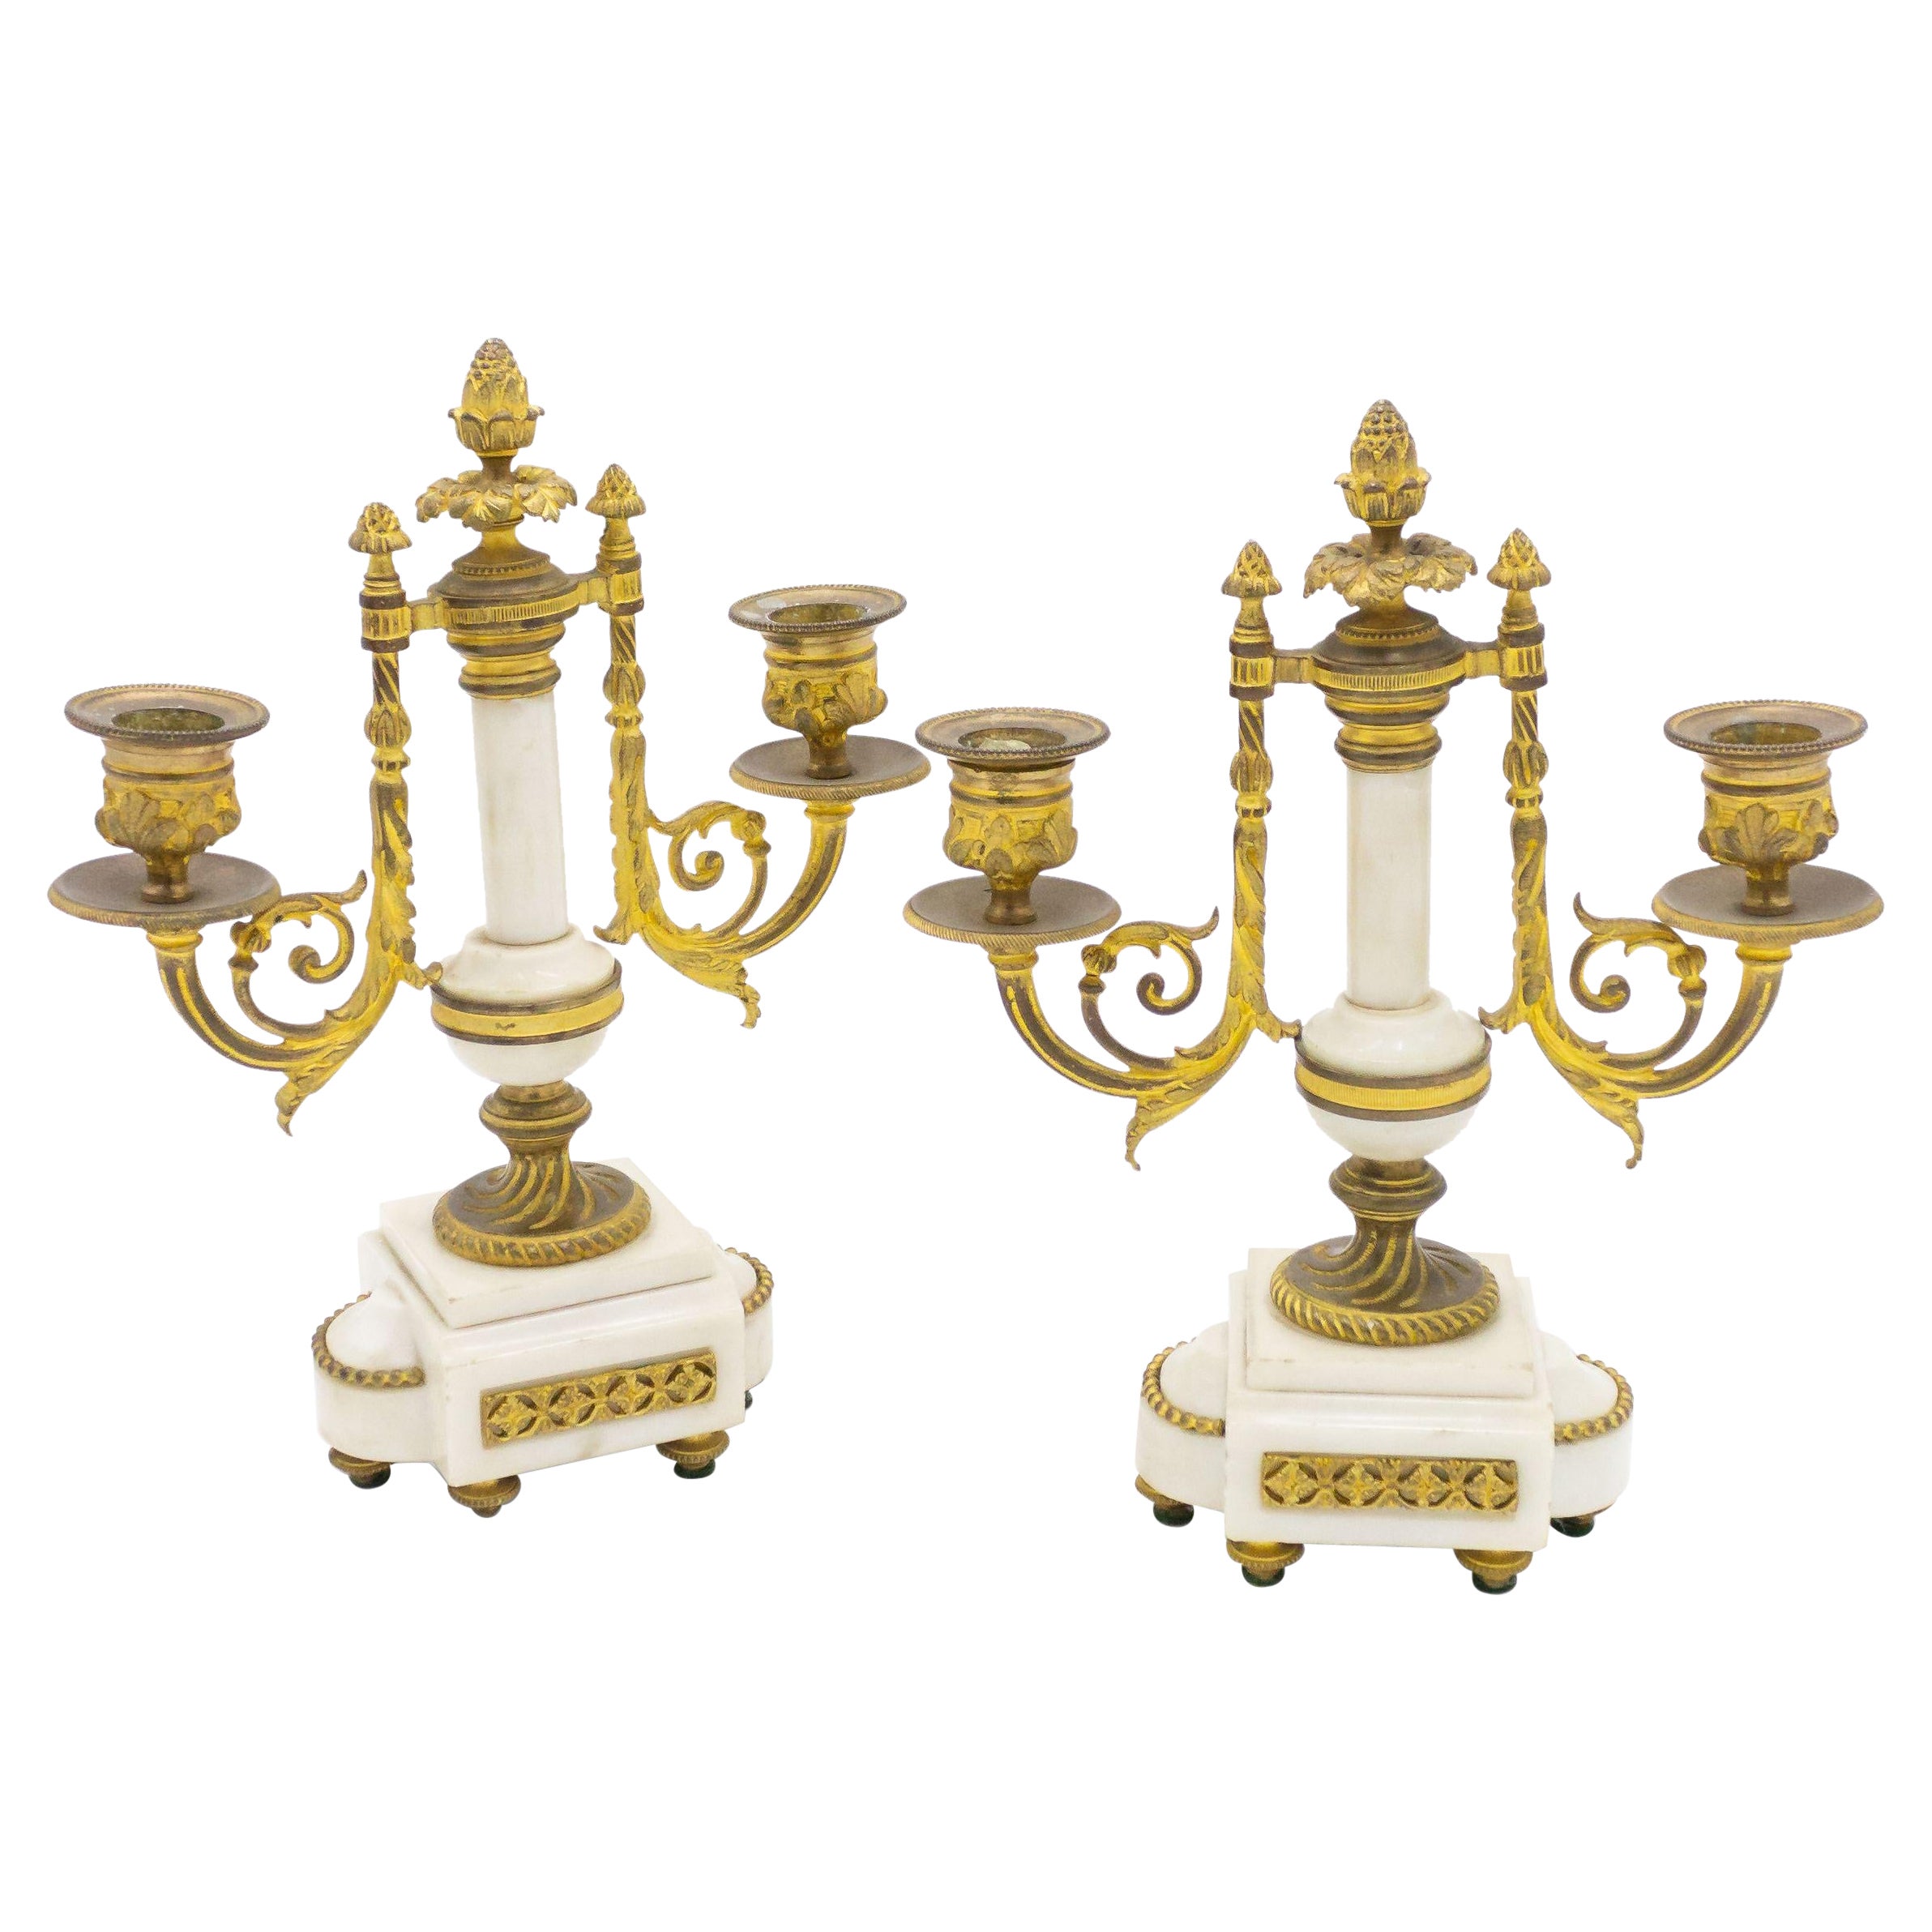 Pair of French Louis XVI Style Marble and Bronze Candelabras